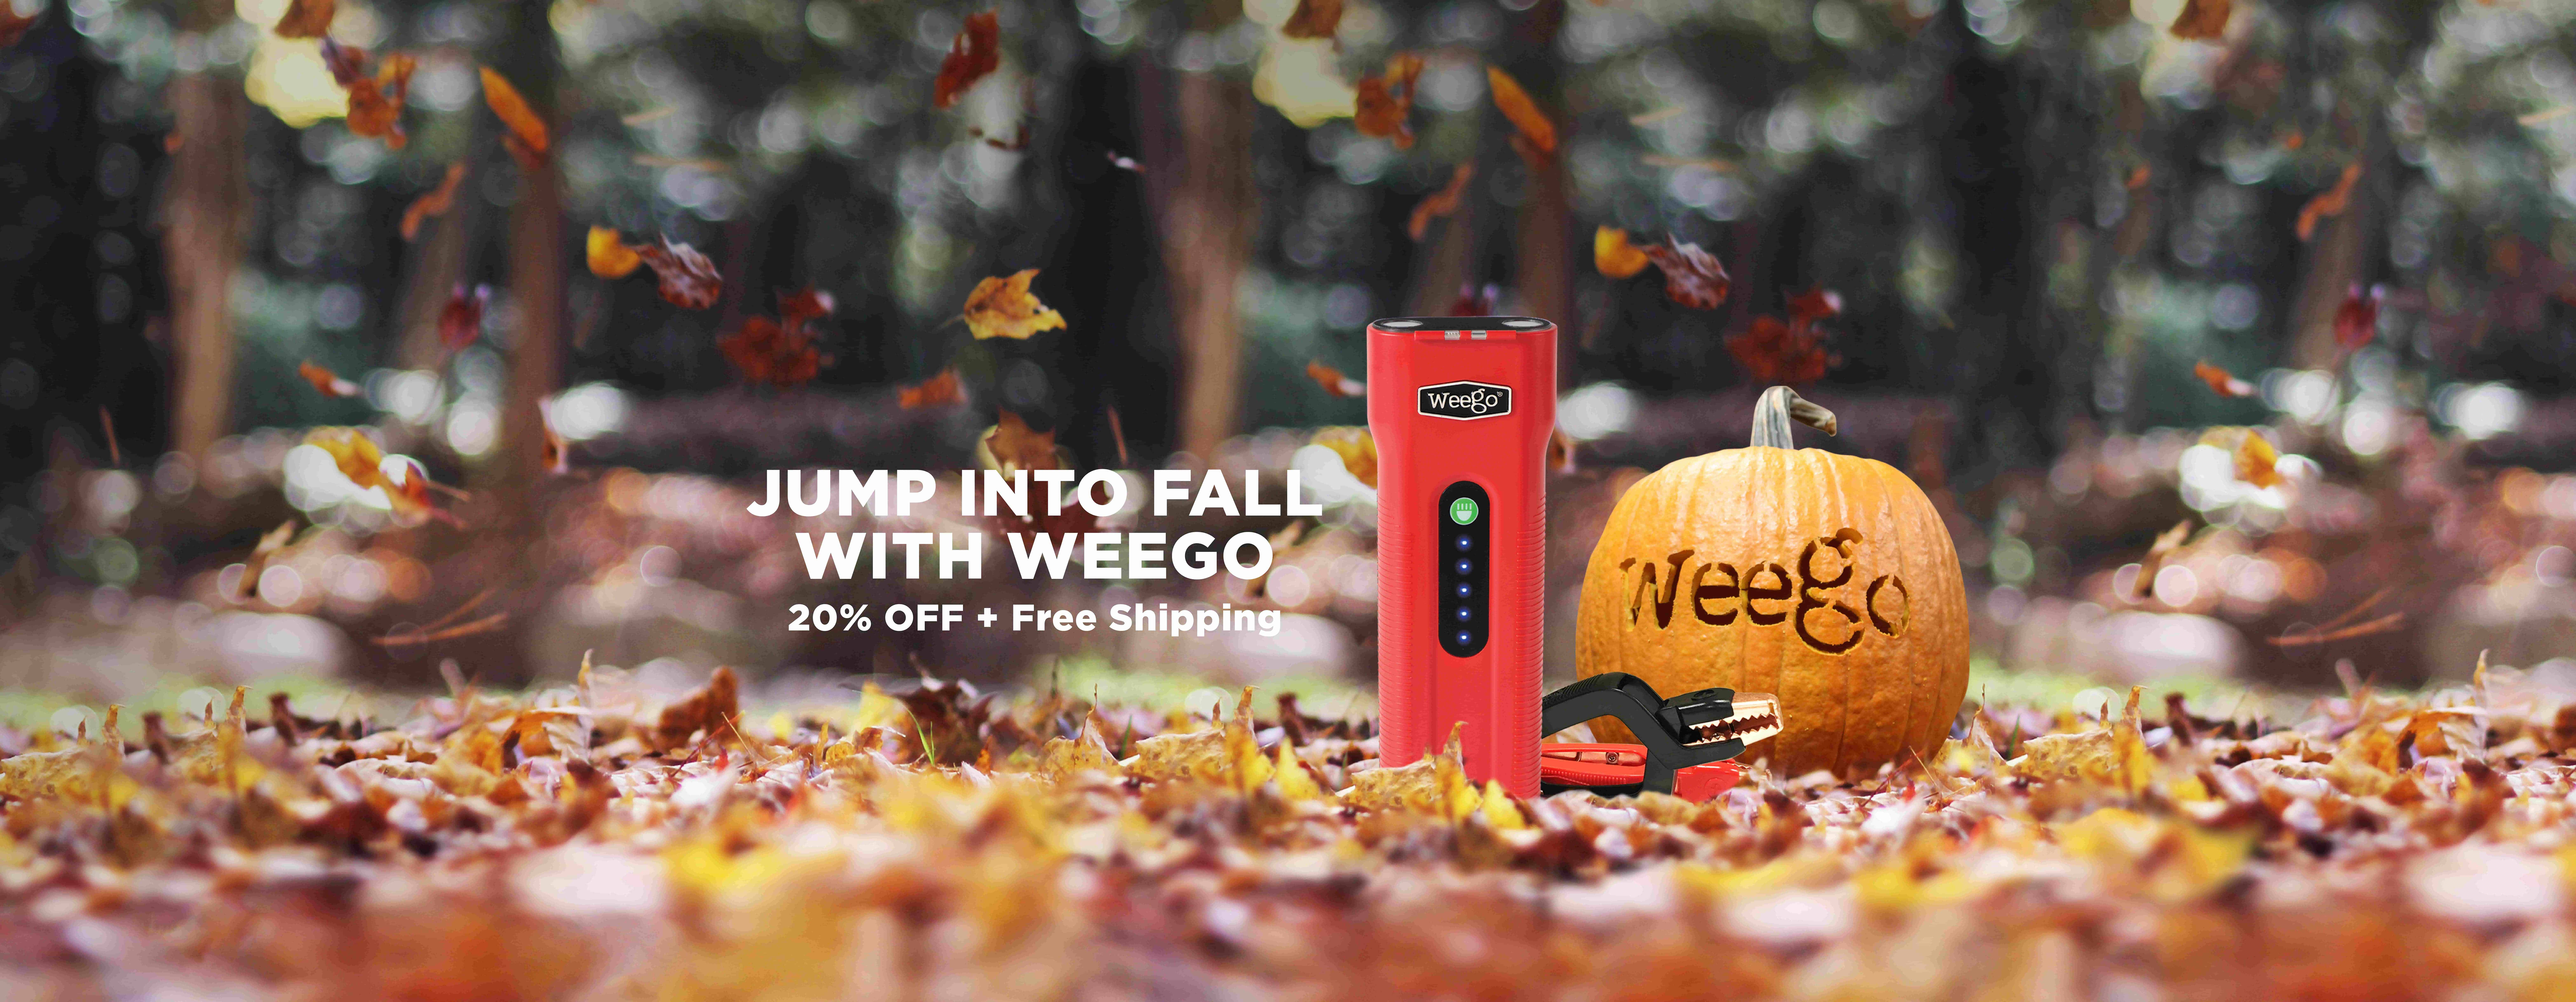 Jump into Fall with Weego